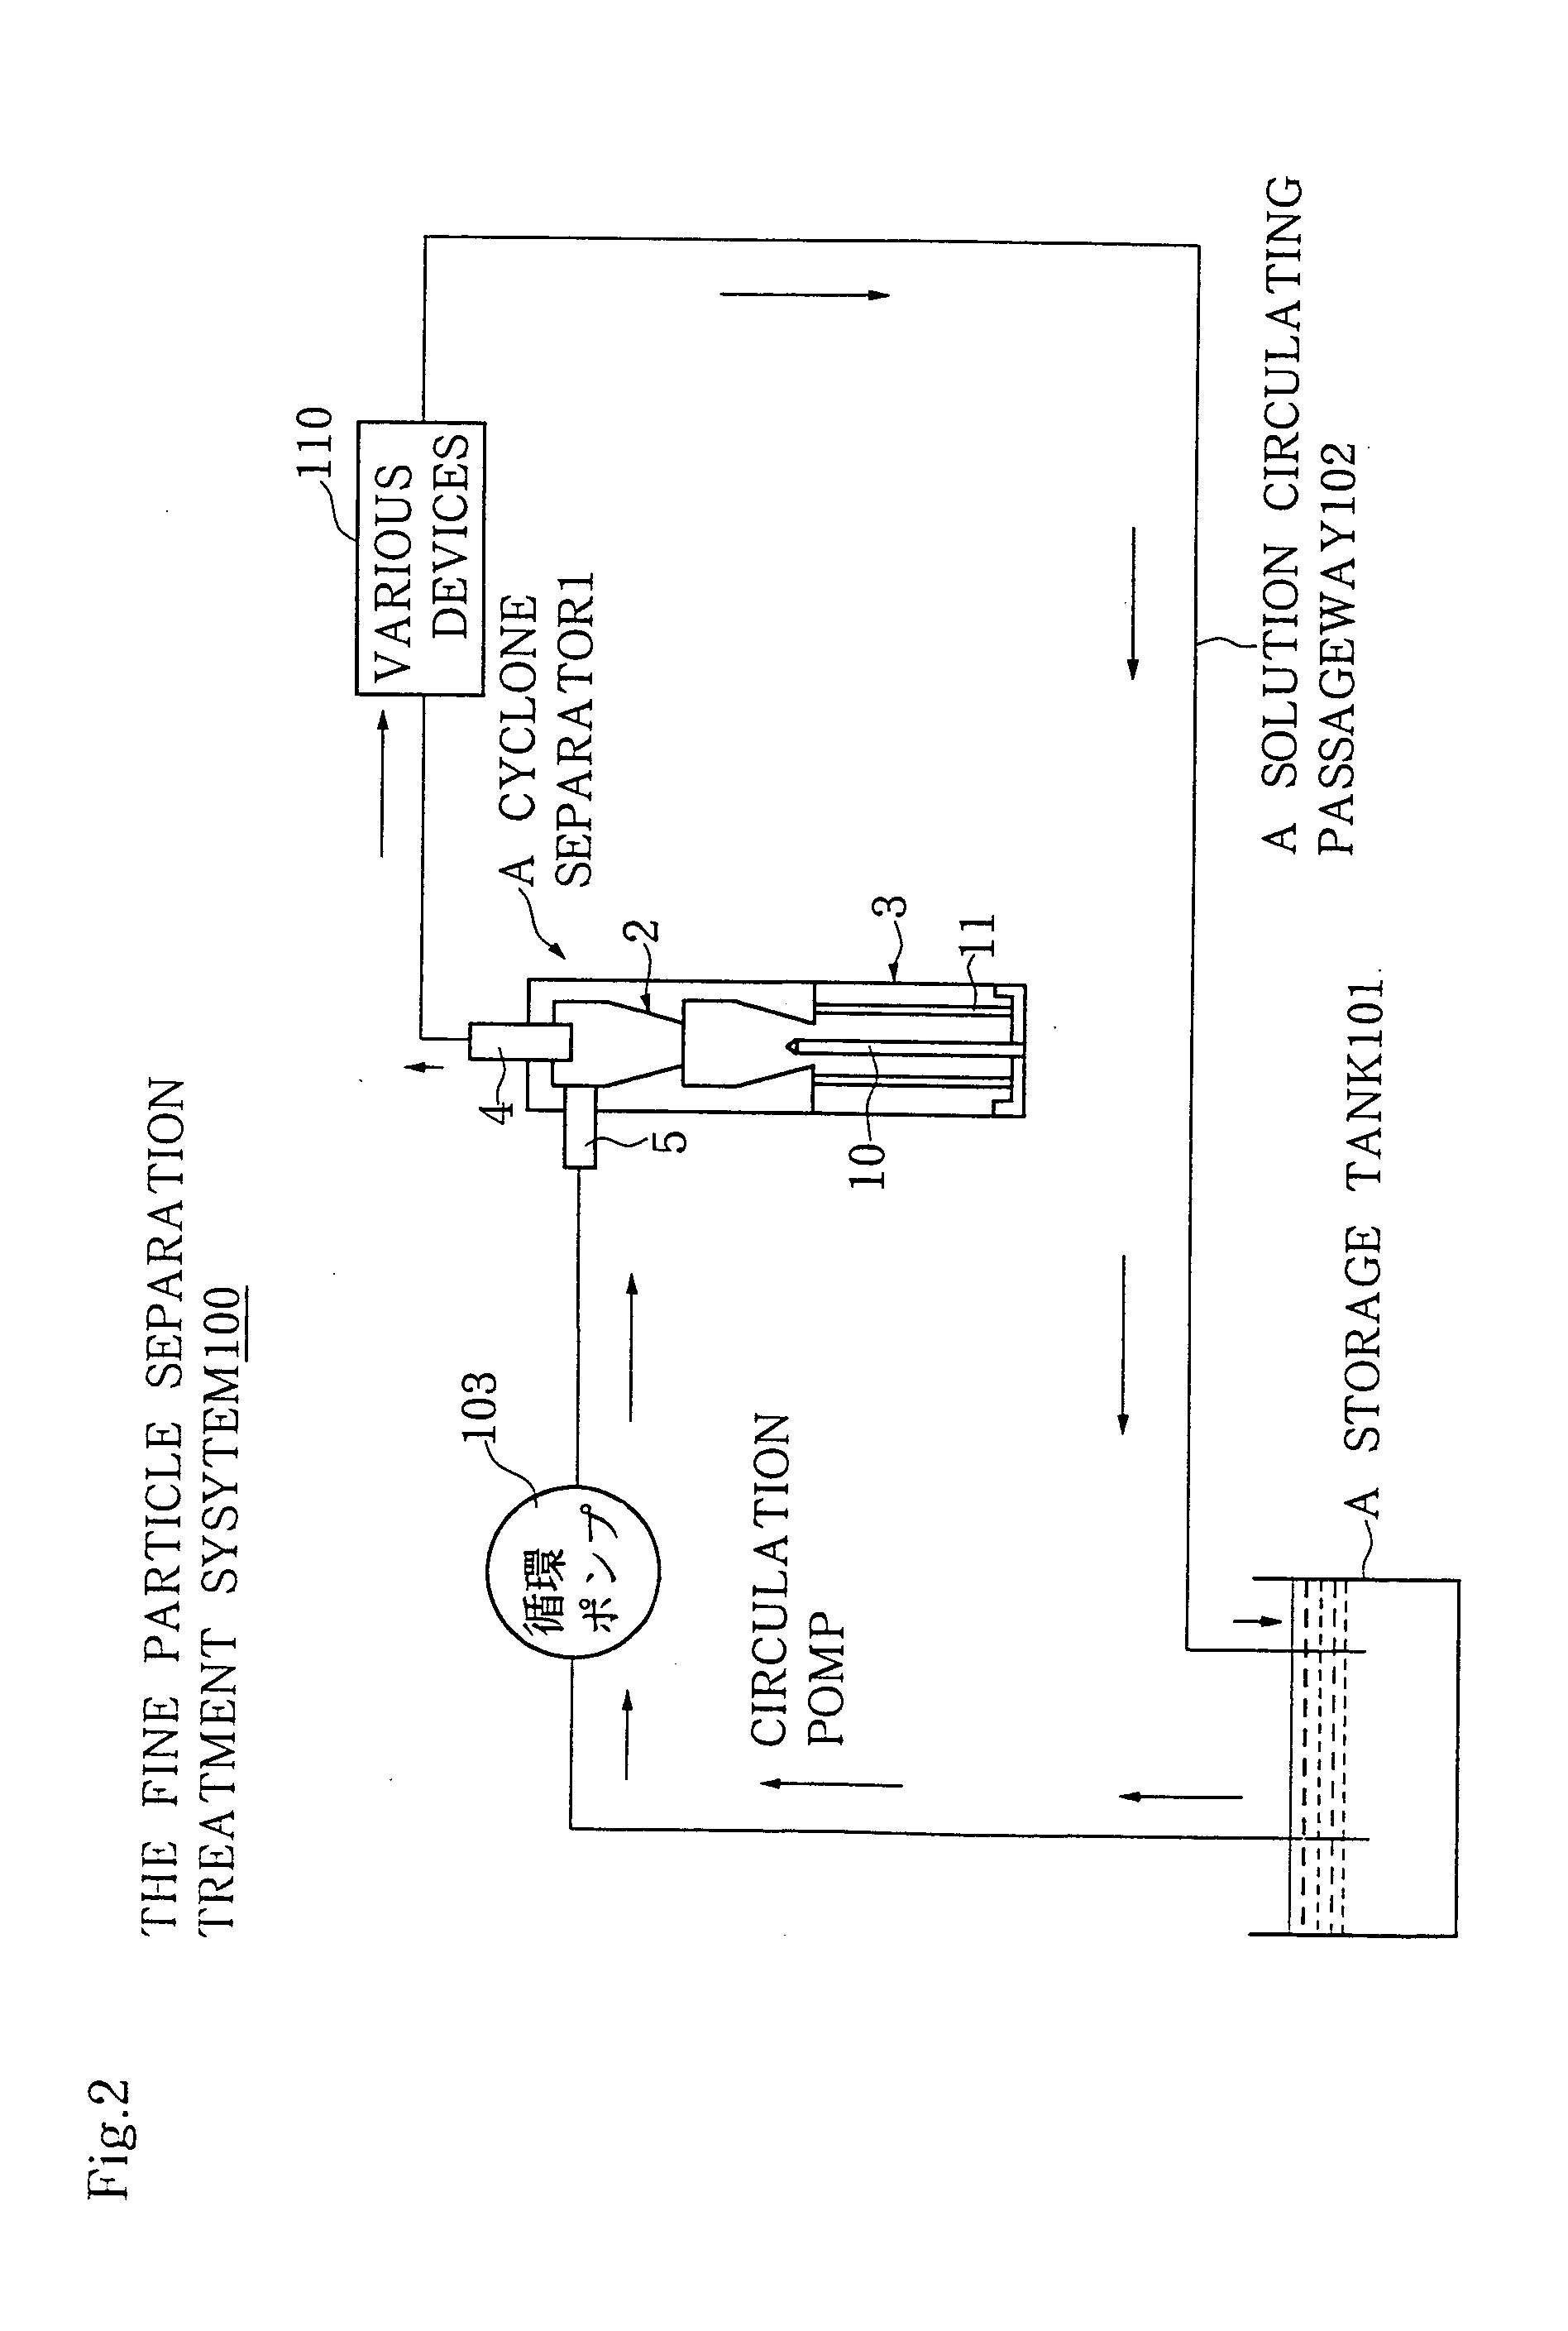 Fine particle separation treatment system and cyclone separator